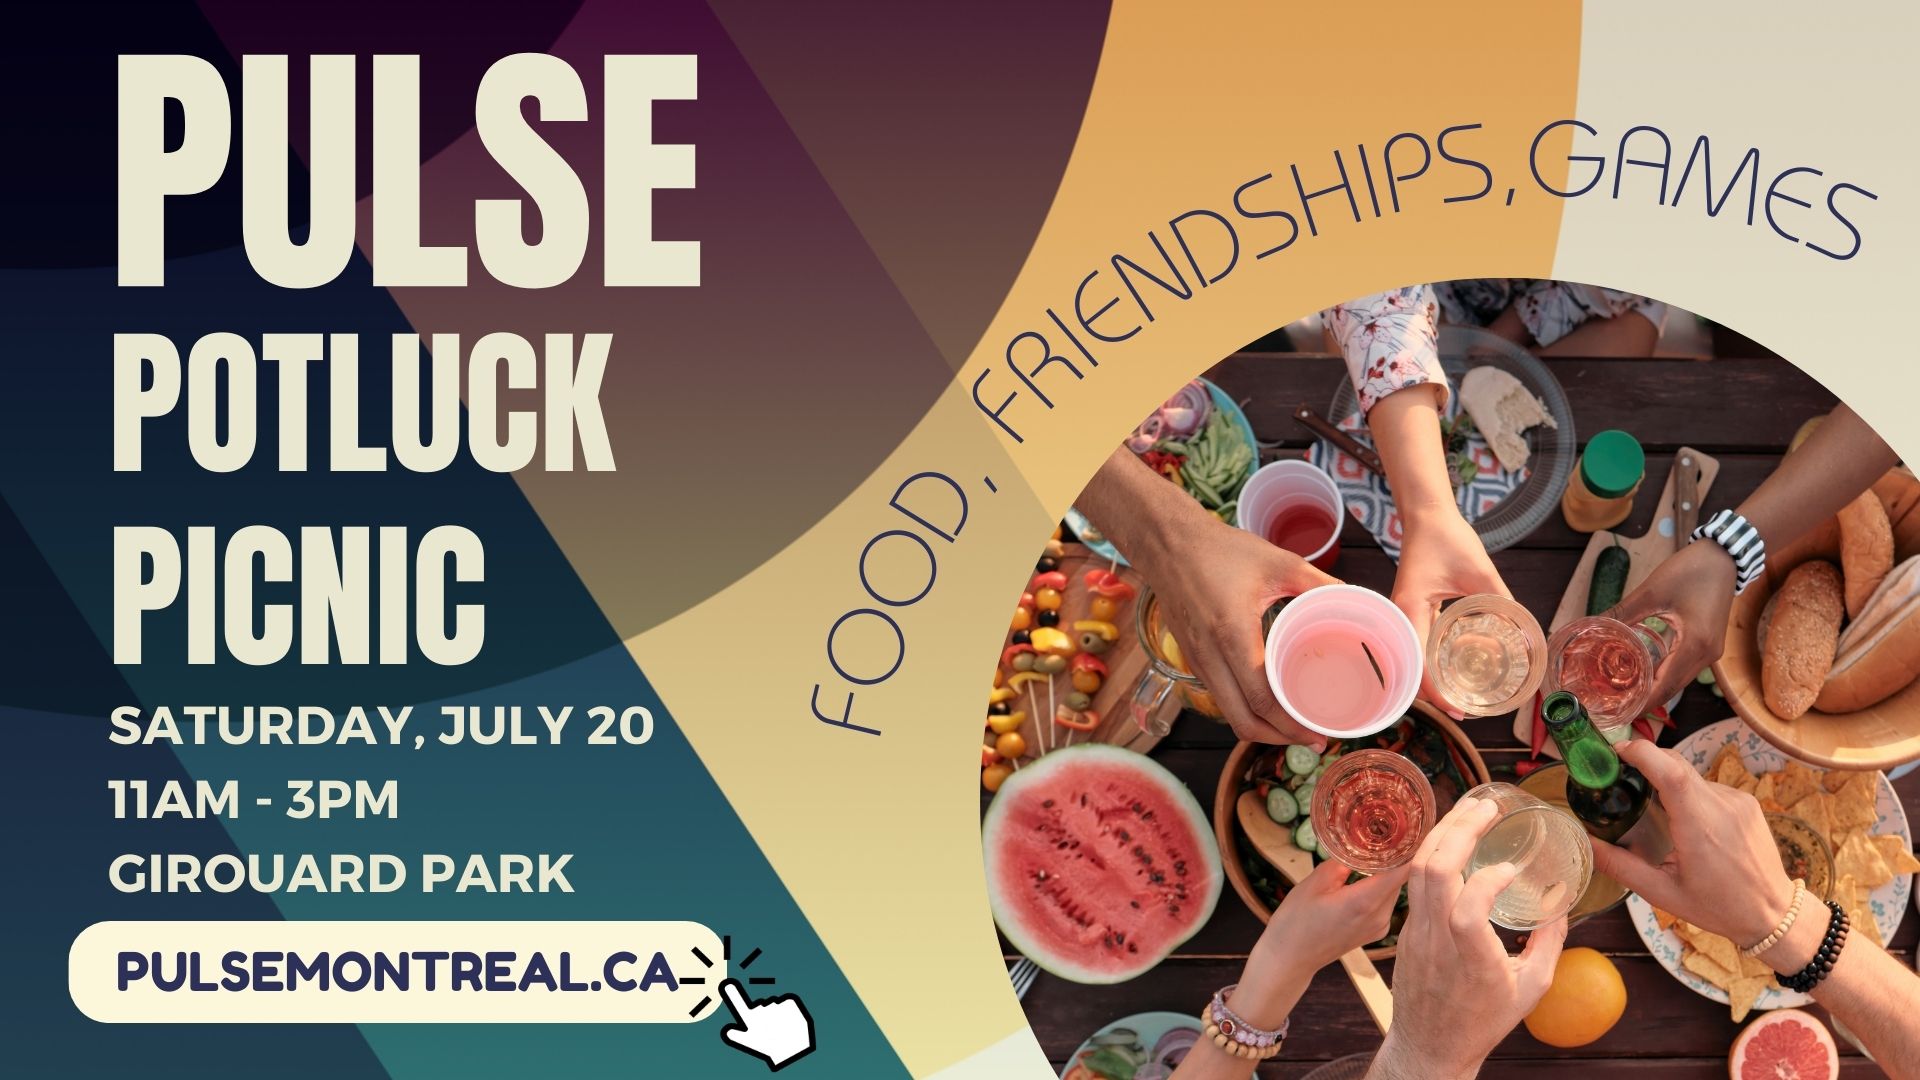 Featured image for “Pulse Potluck Picnic”